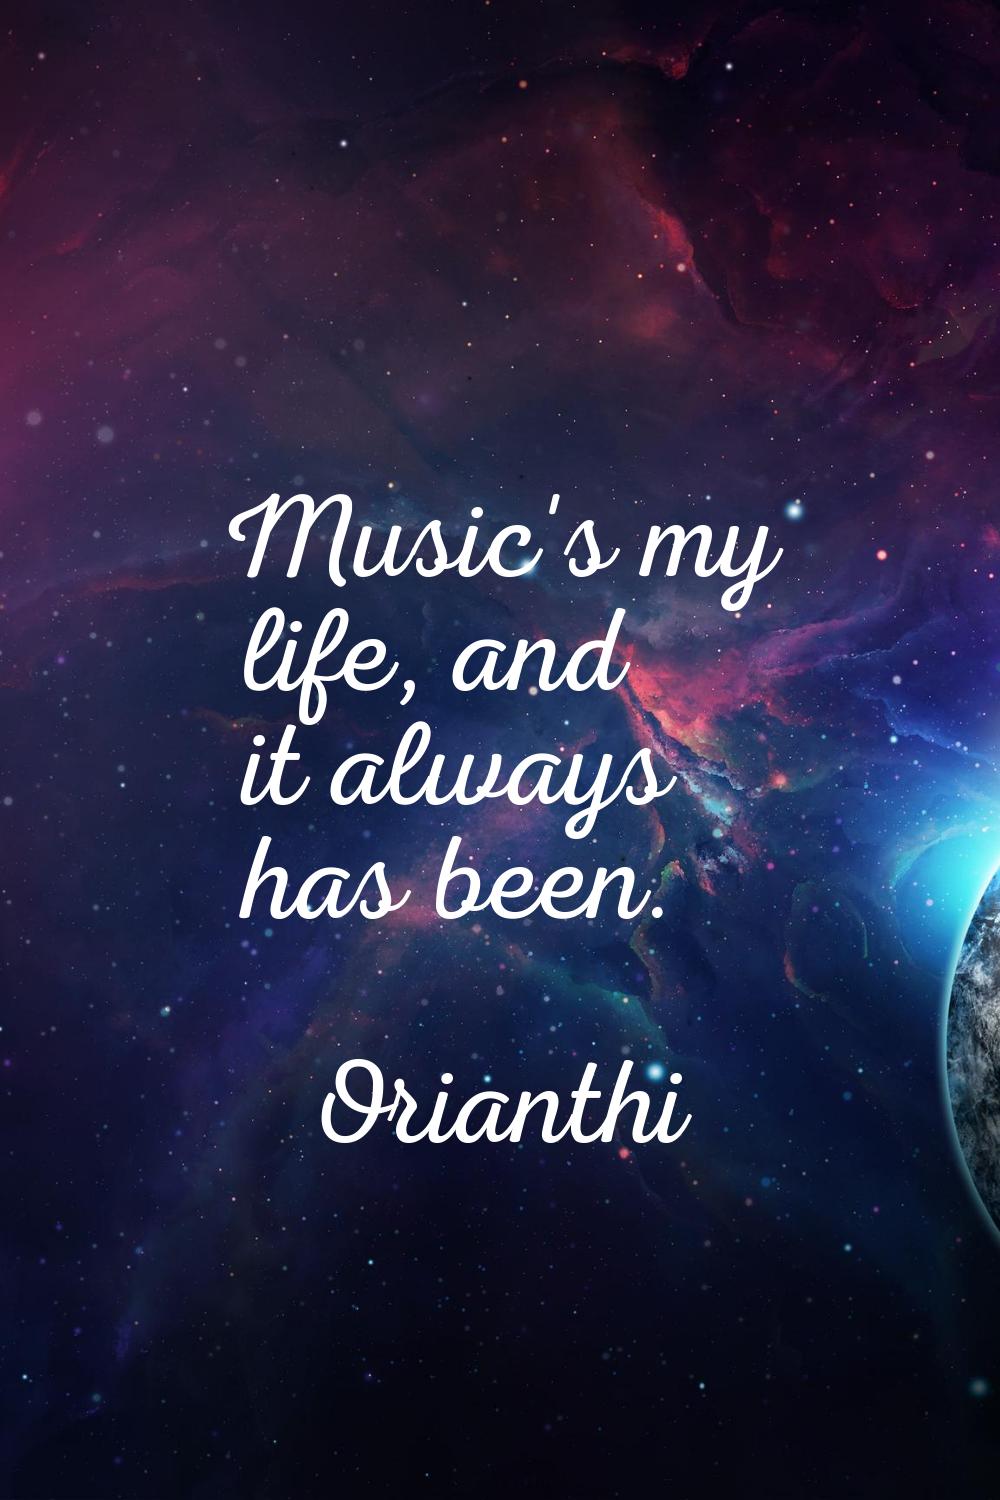 Music's my life, and it always has been.